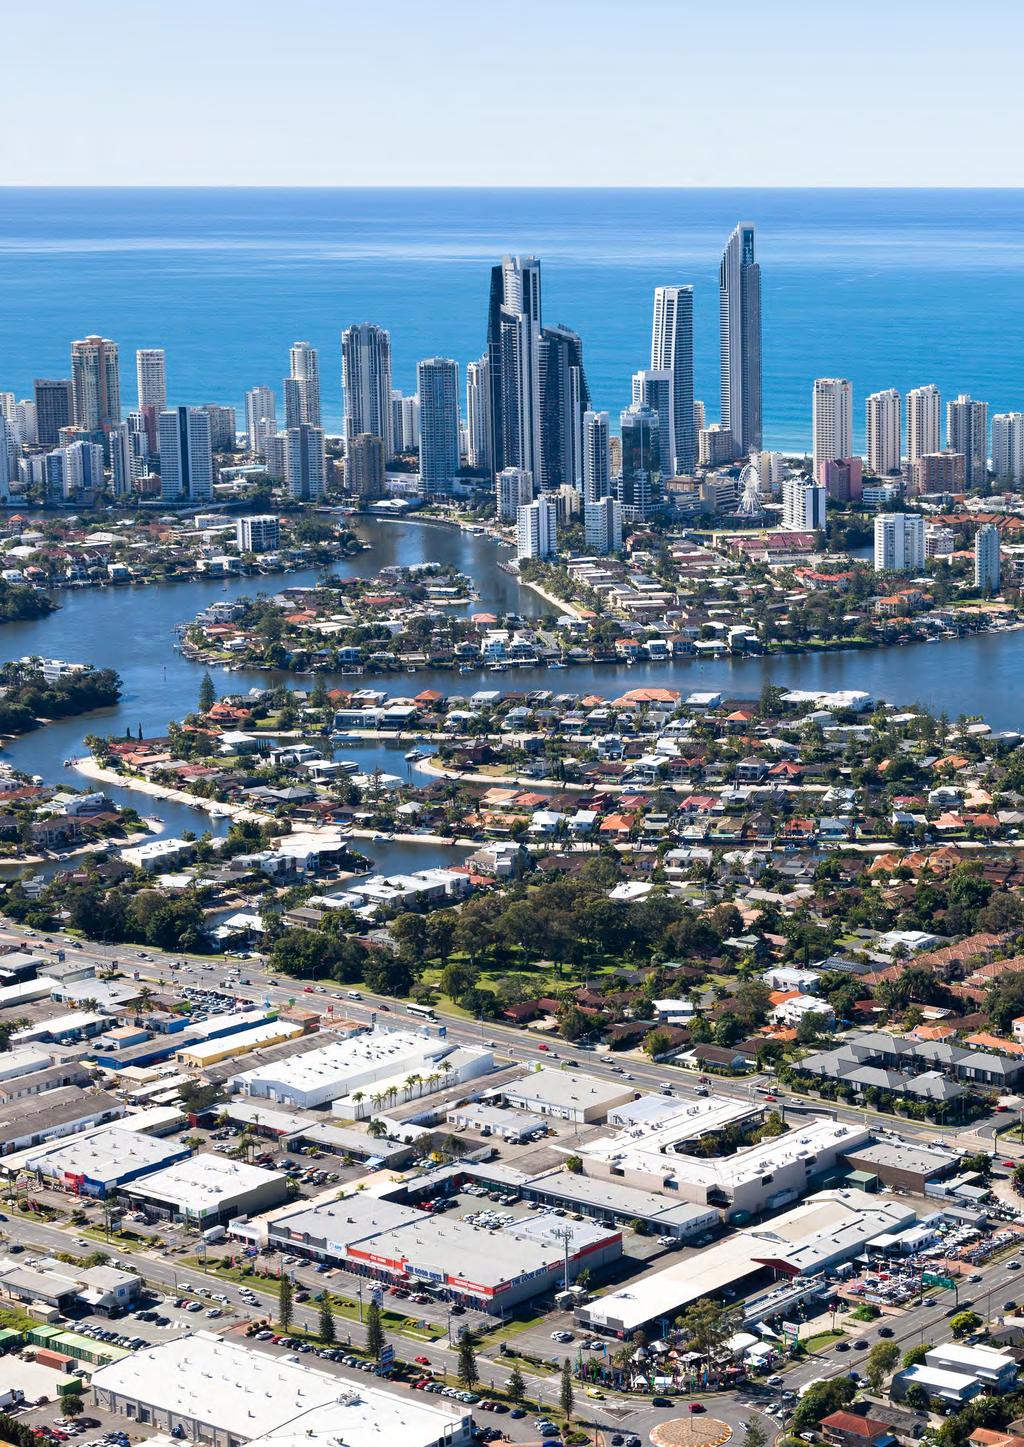 Gold Coast OVERVIEW Gold Coast office stock at January 2014 totalled 459,890 sqm, down by almost 4,000 sqm on the mid-year stock level.